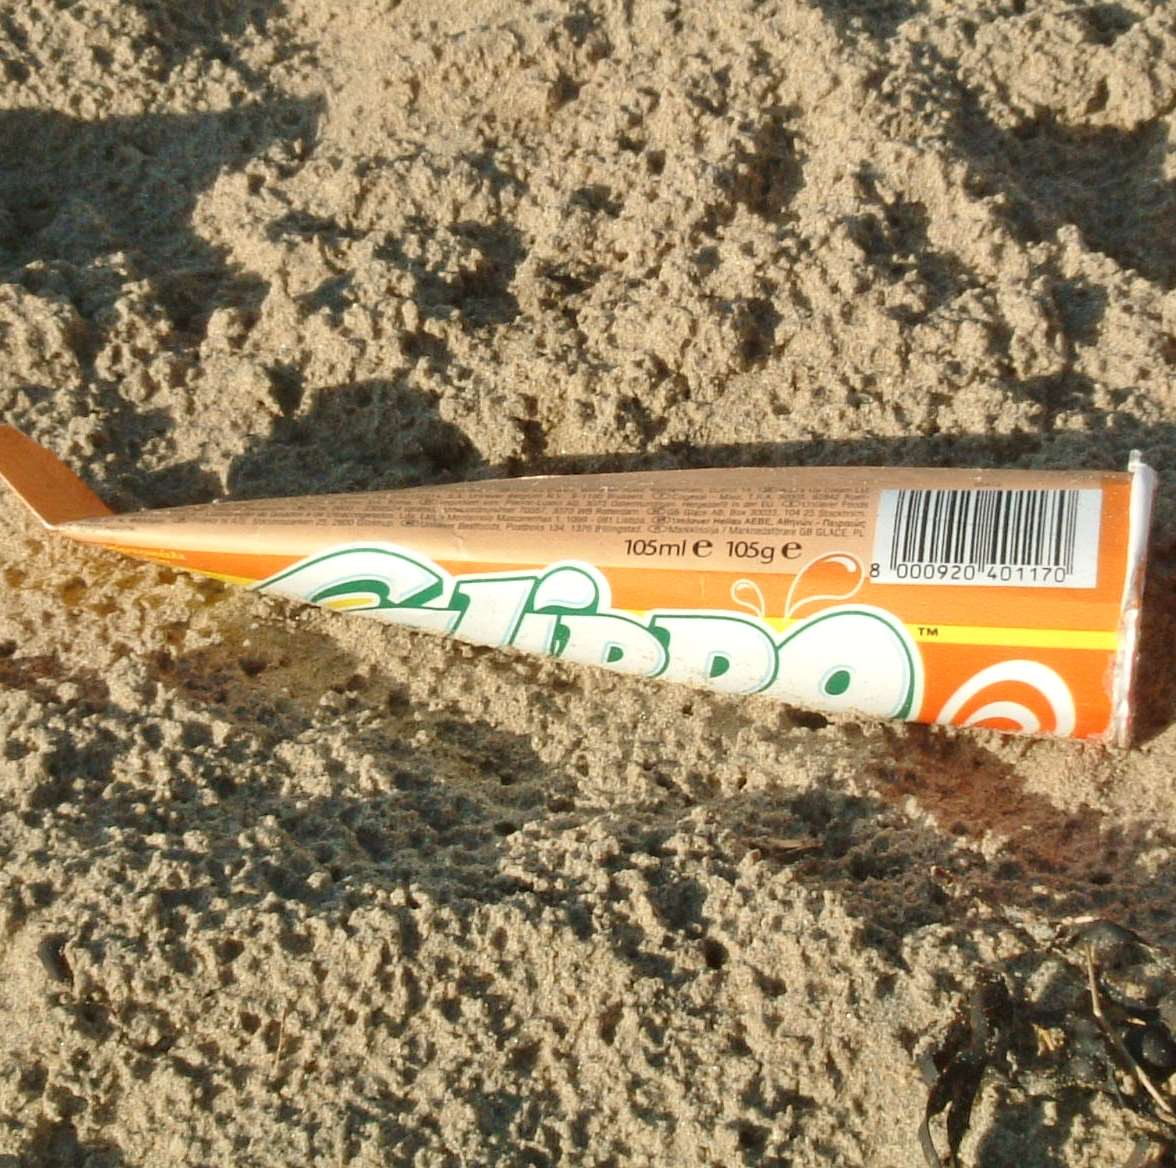 A lolly wrapper left on one of Kent's beaches